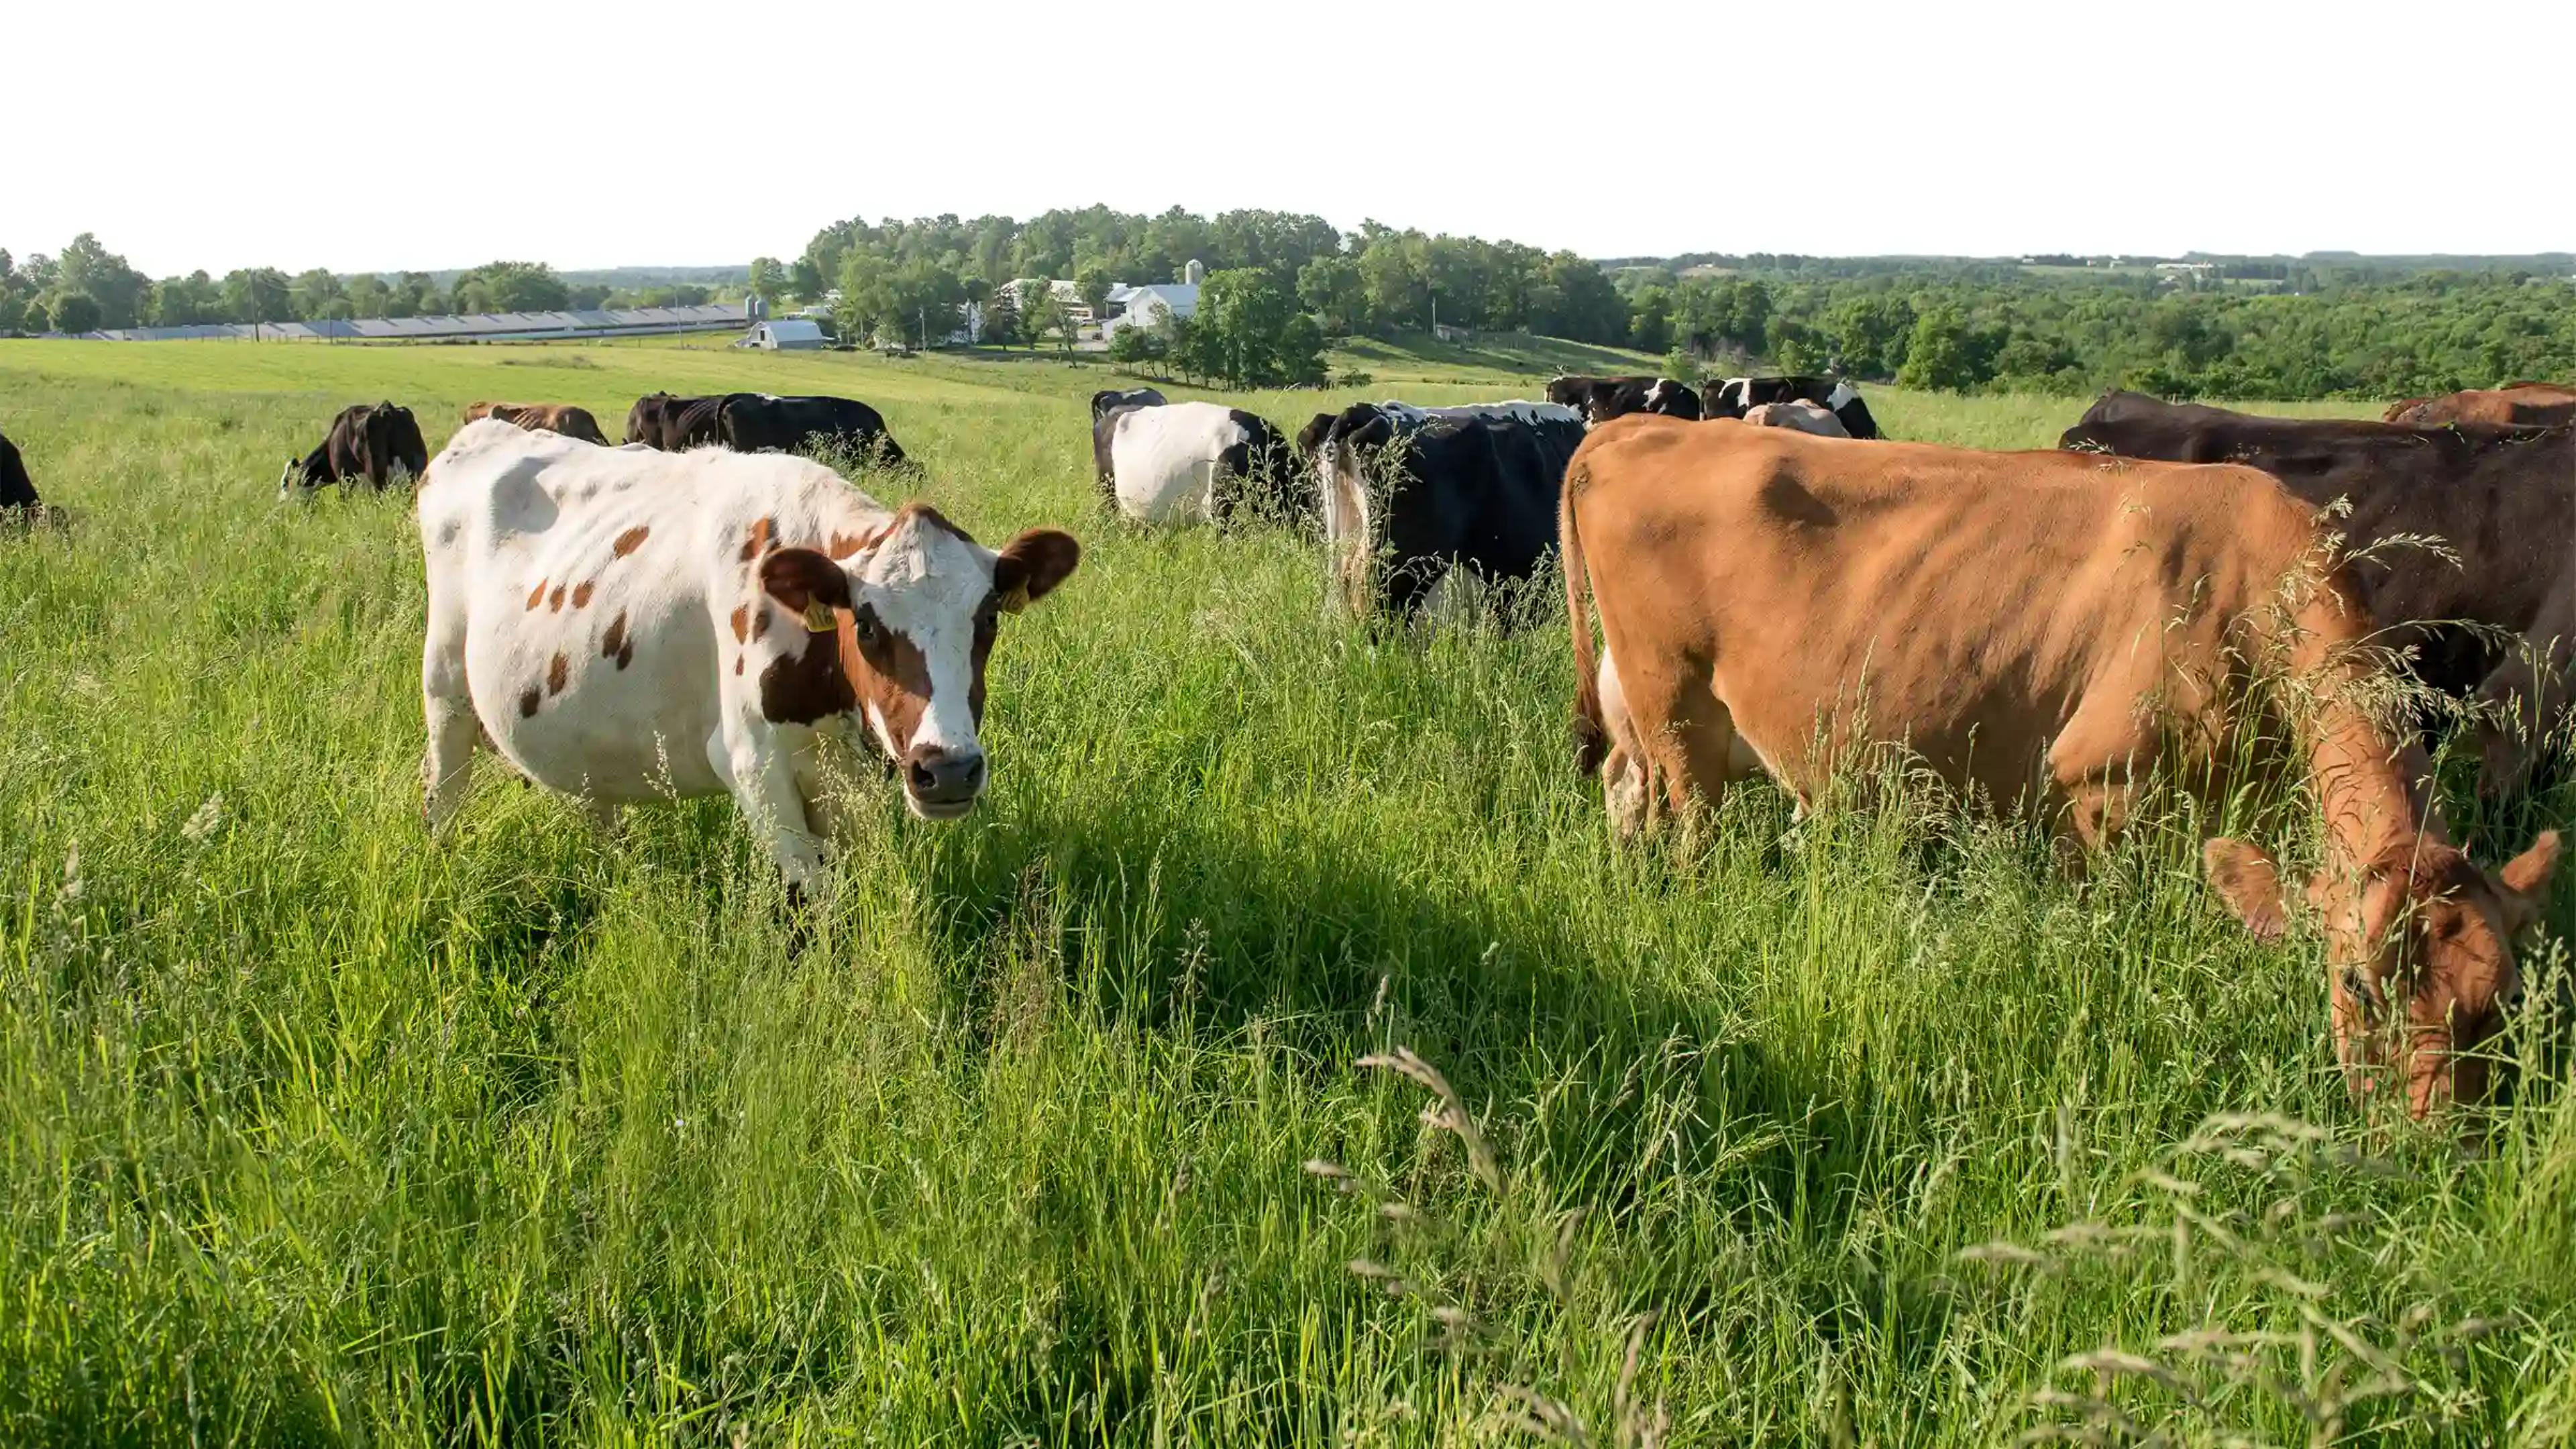 Cows grazing in fresh pasture grass.